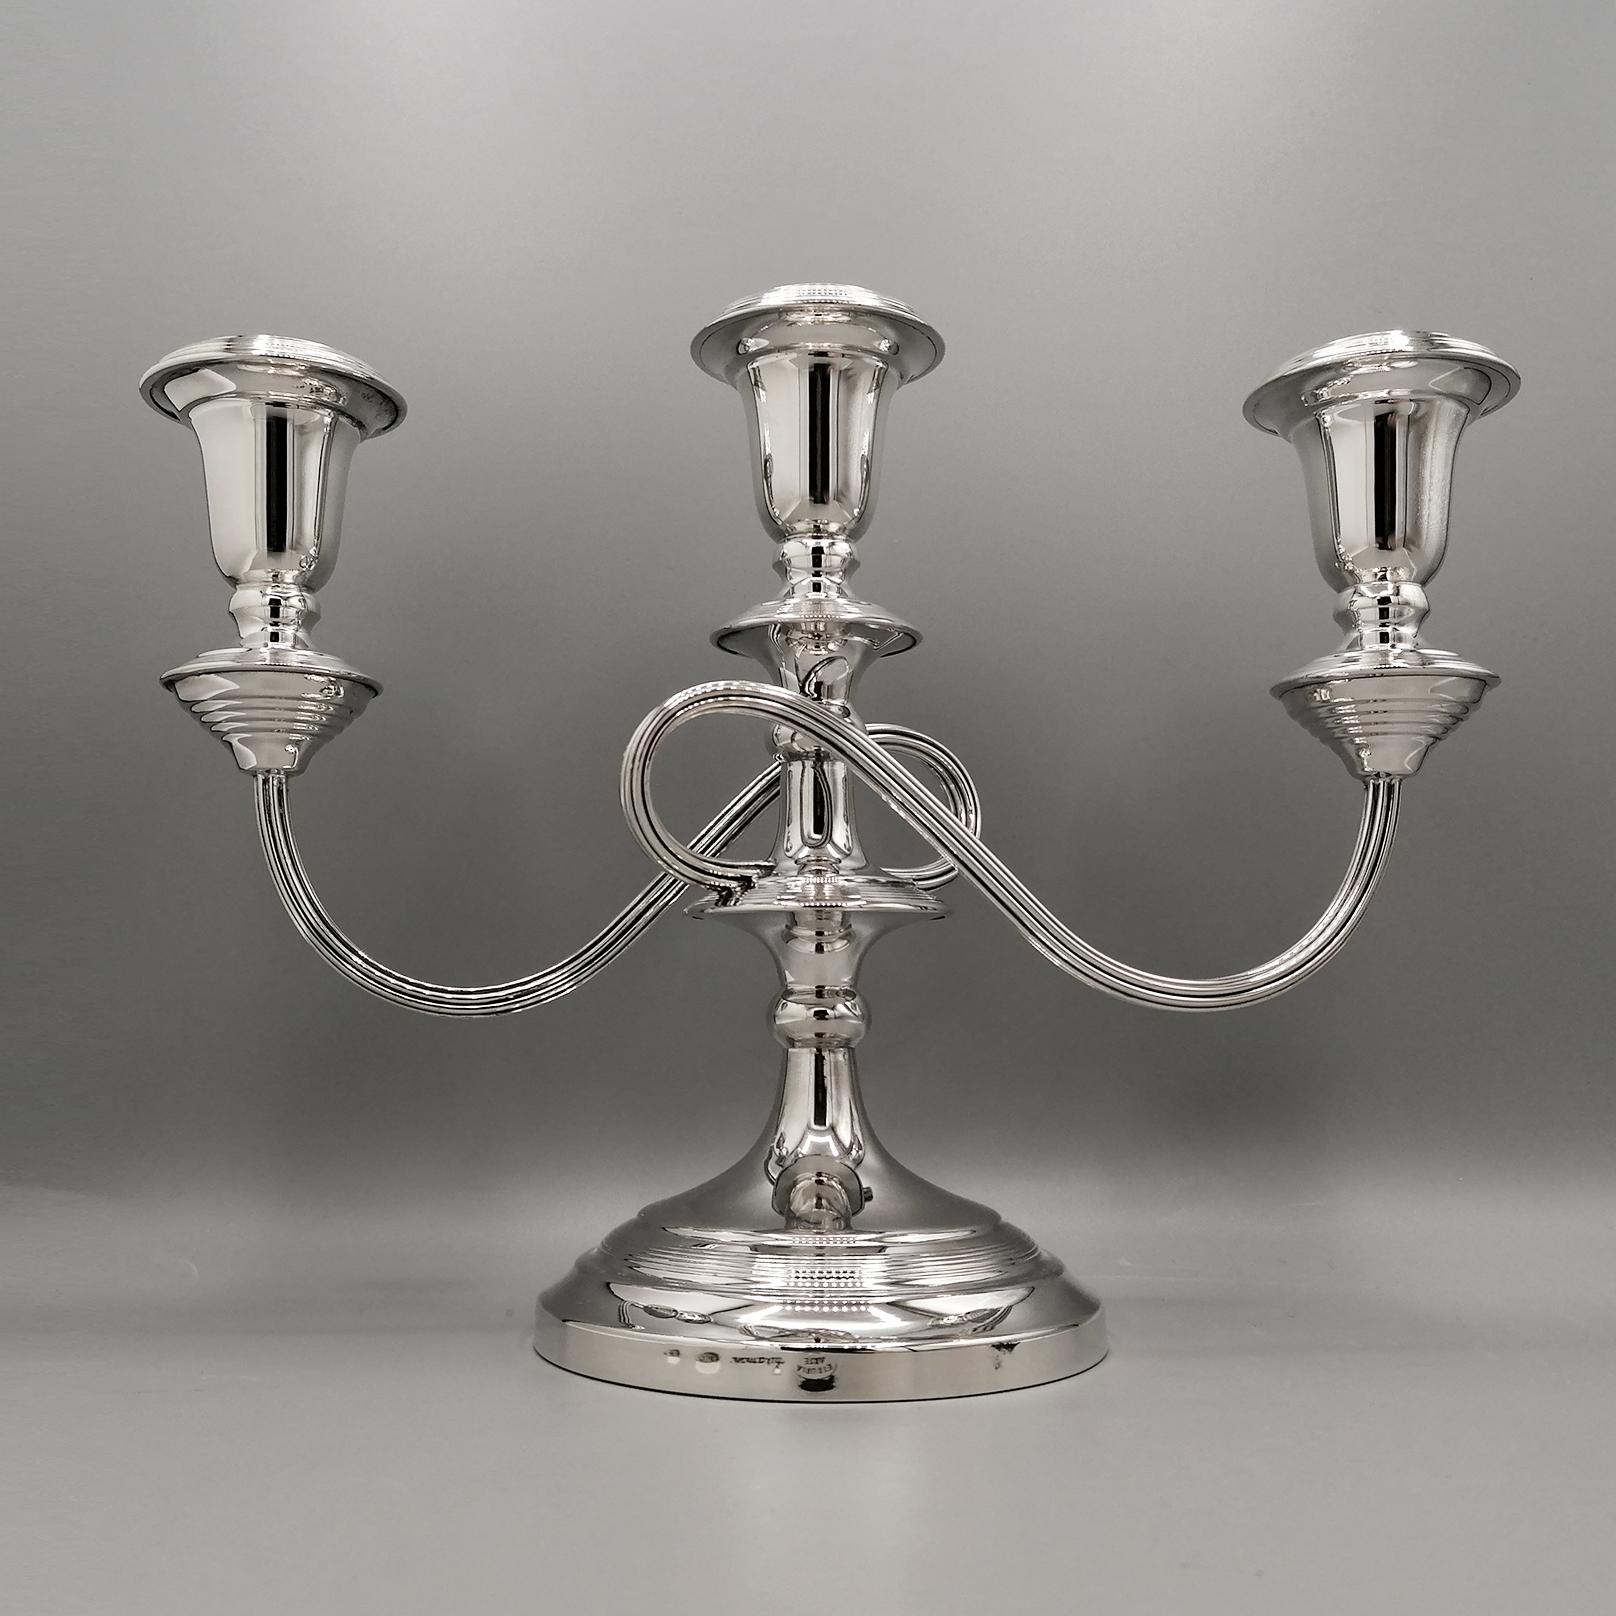 20th Century Italian solid Silver Pr. of Candelabras For Sale 5